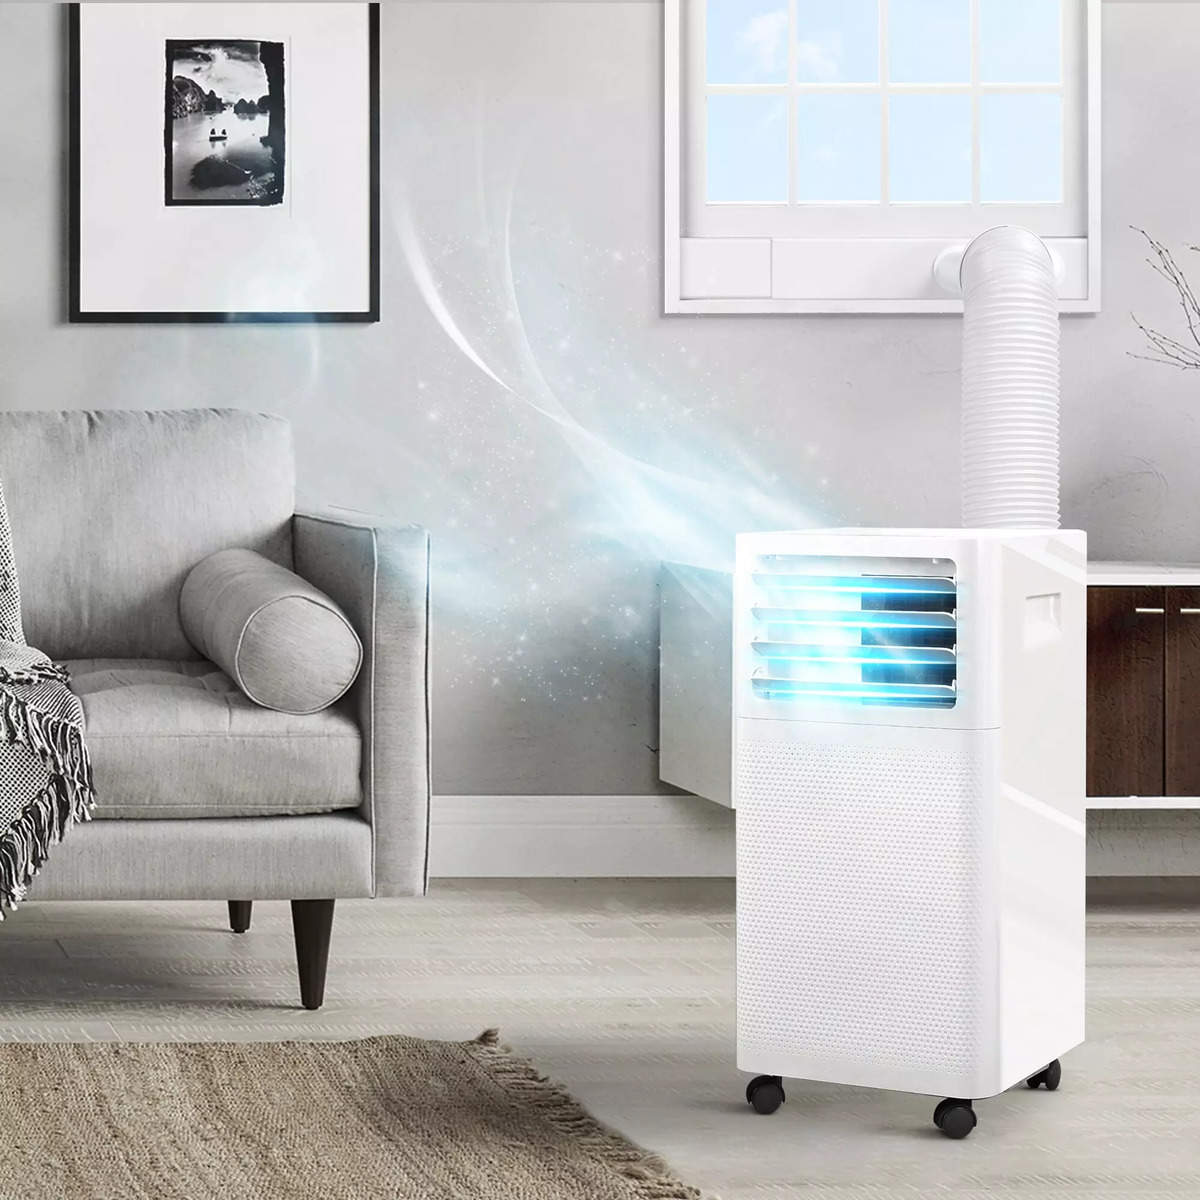 EnjoyCool Link Portable Outdoor Air Conditioner Rotary mini-AC